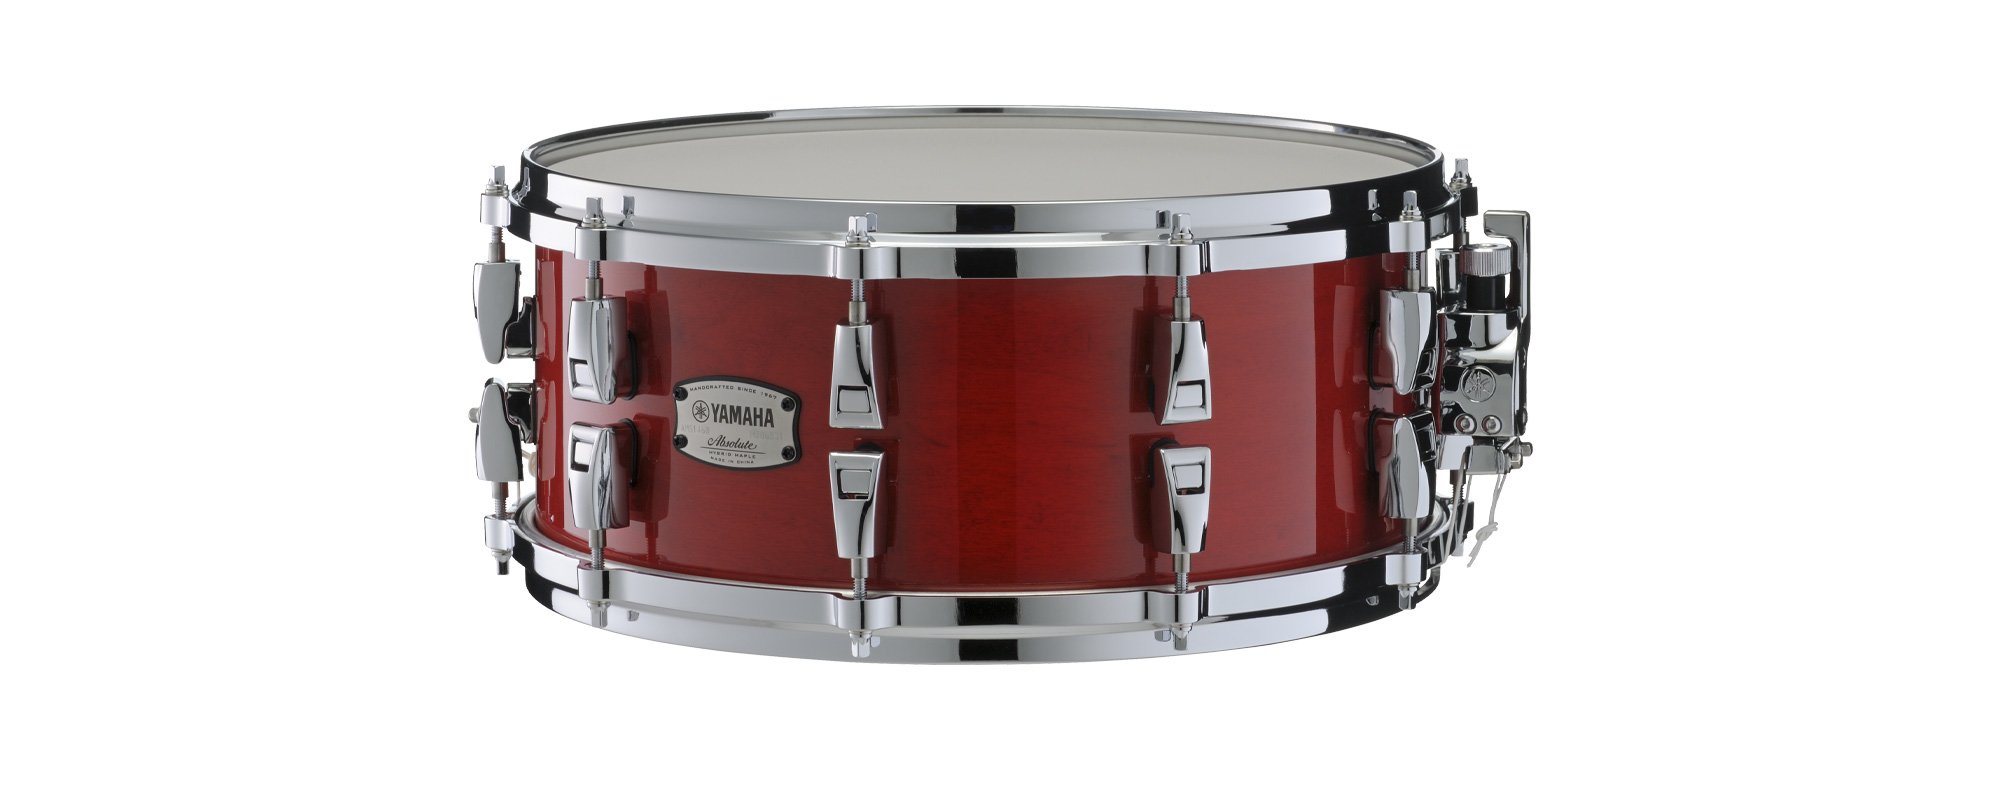 Absolute Hybrid Maple - Overview - Snare Drums - Acoustic Drums